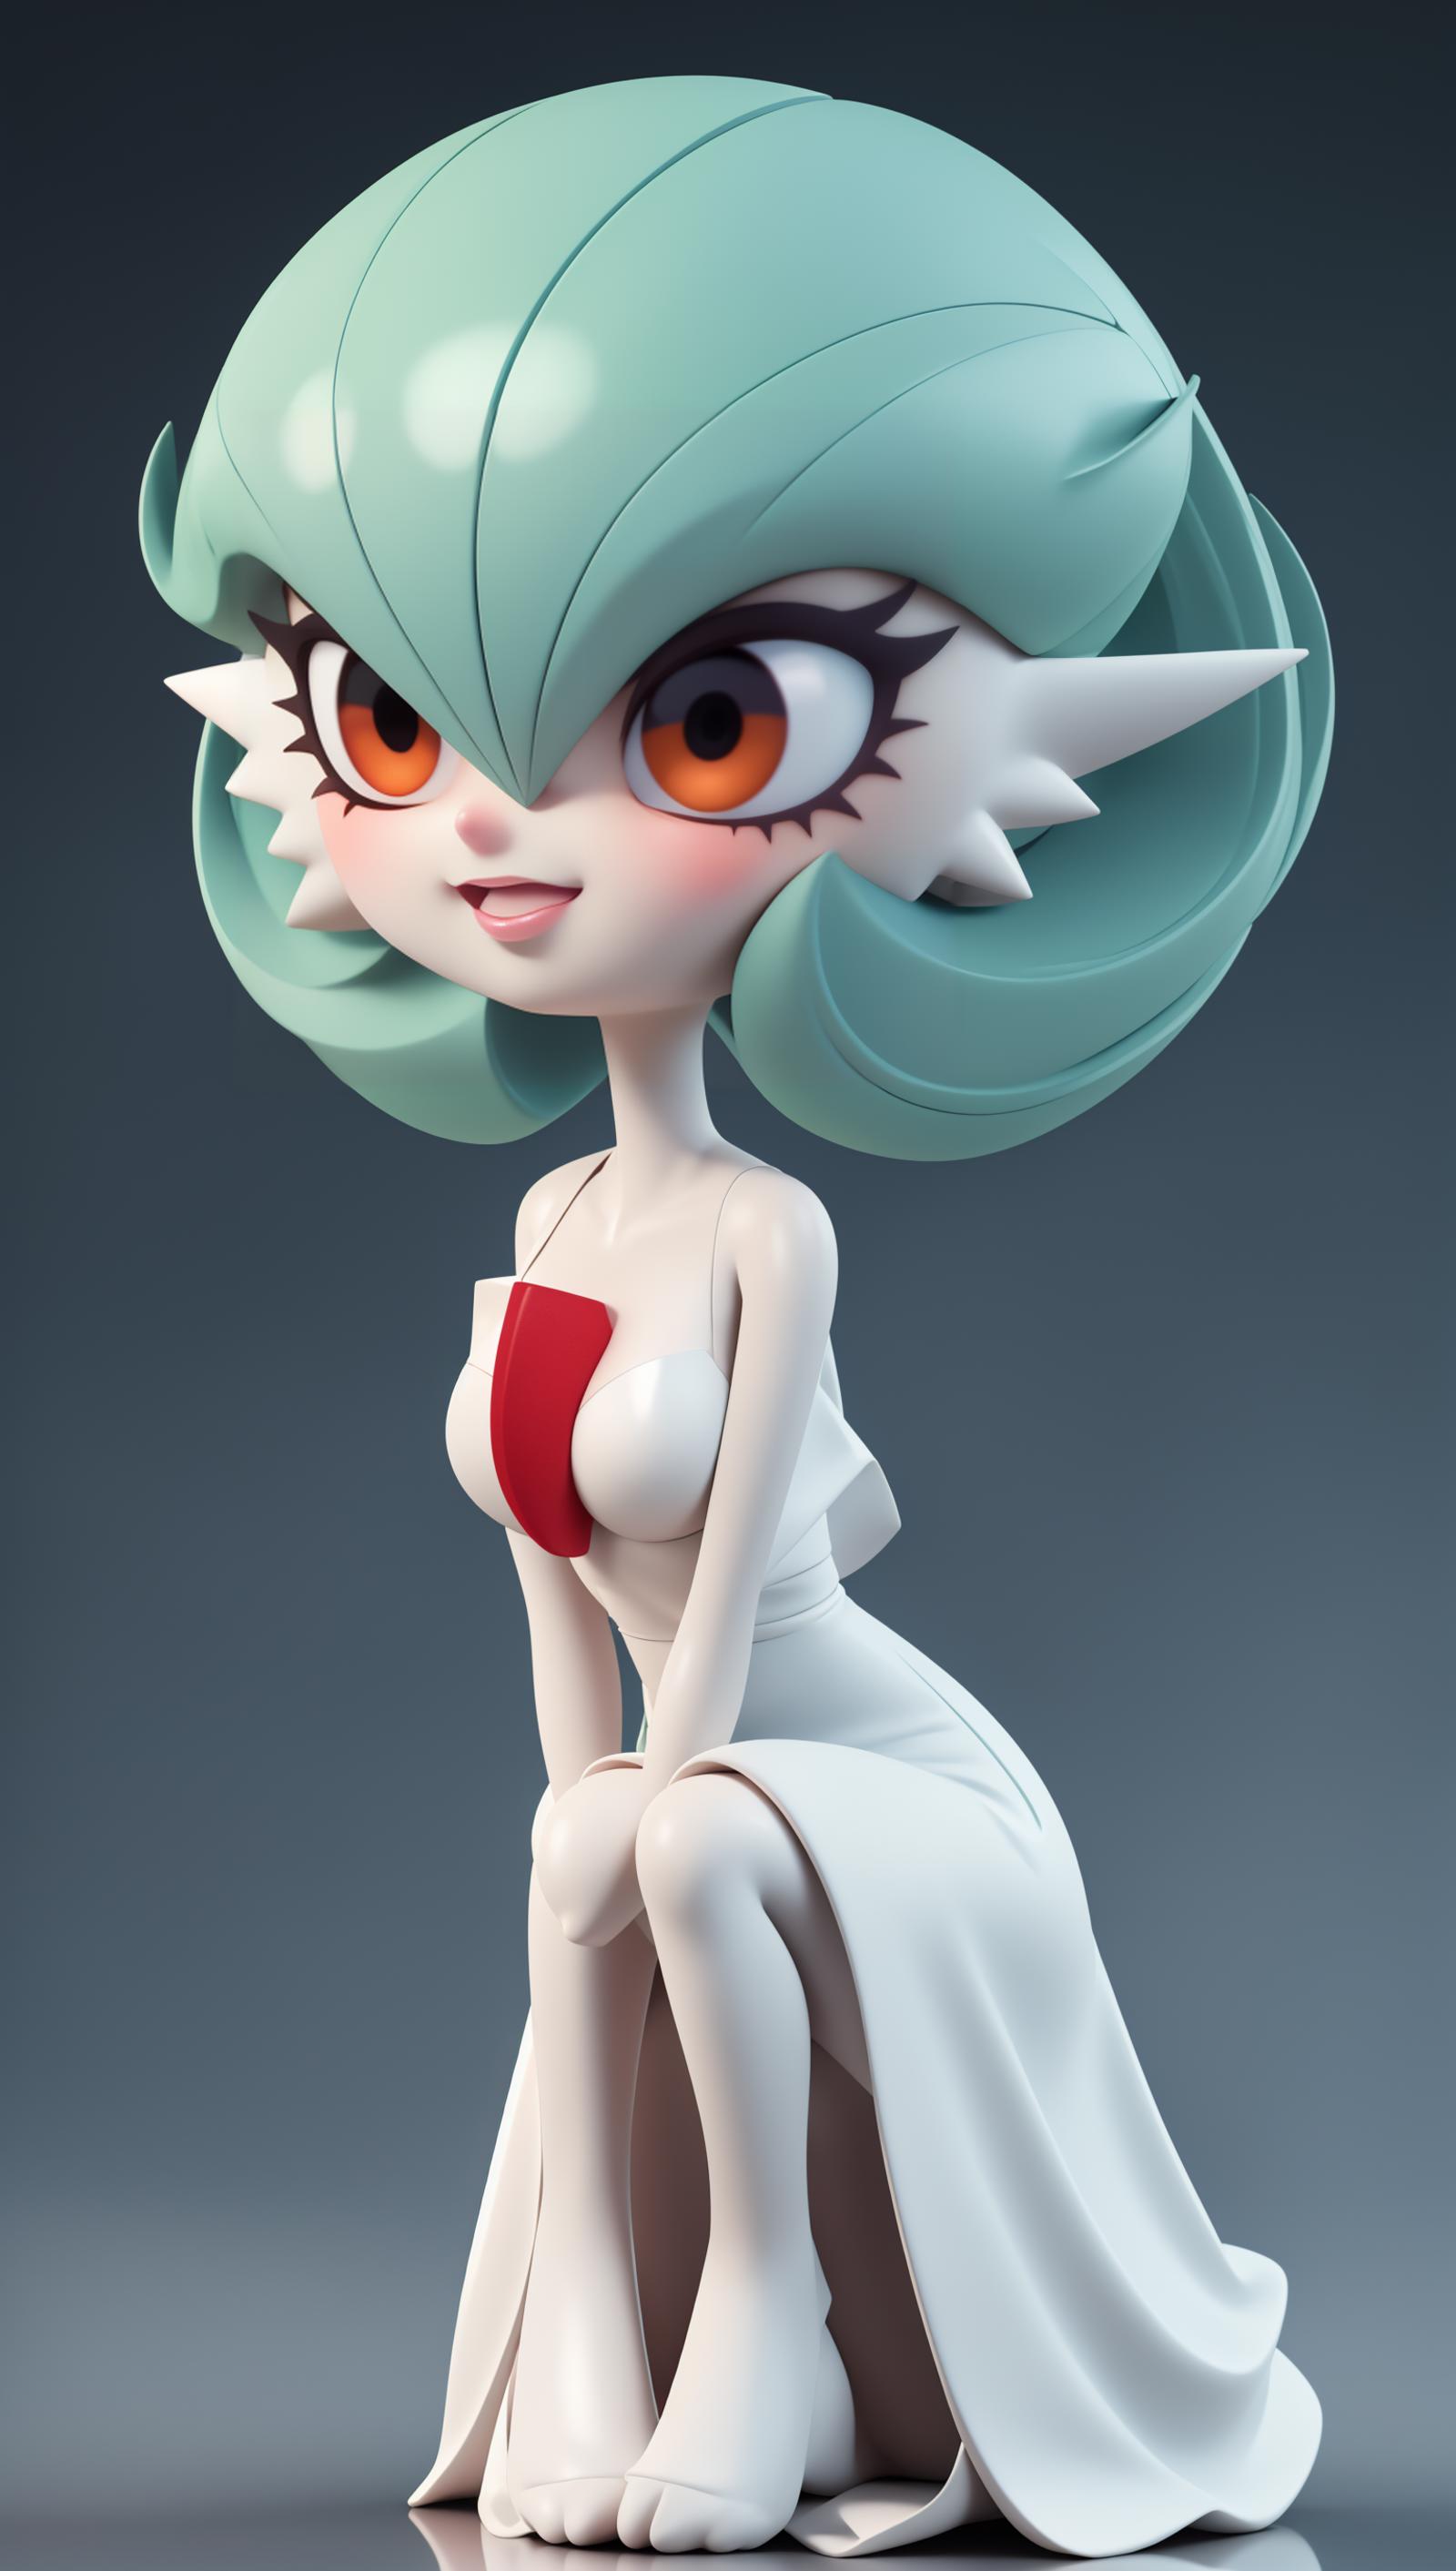 A 3D model of a female character with aqua hair, green eyes, and a red ribbon.